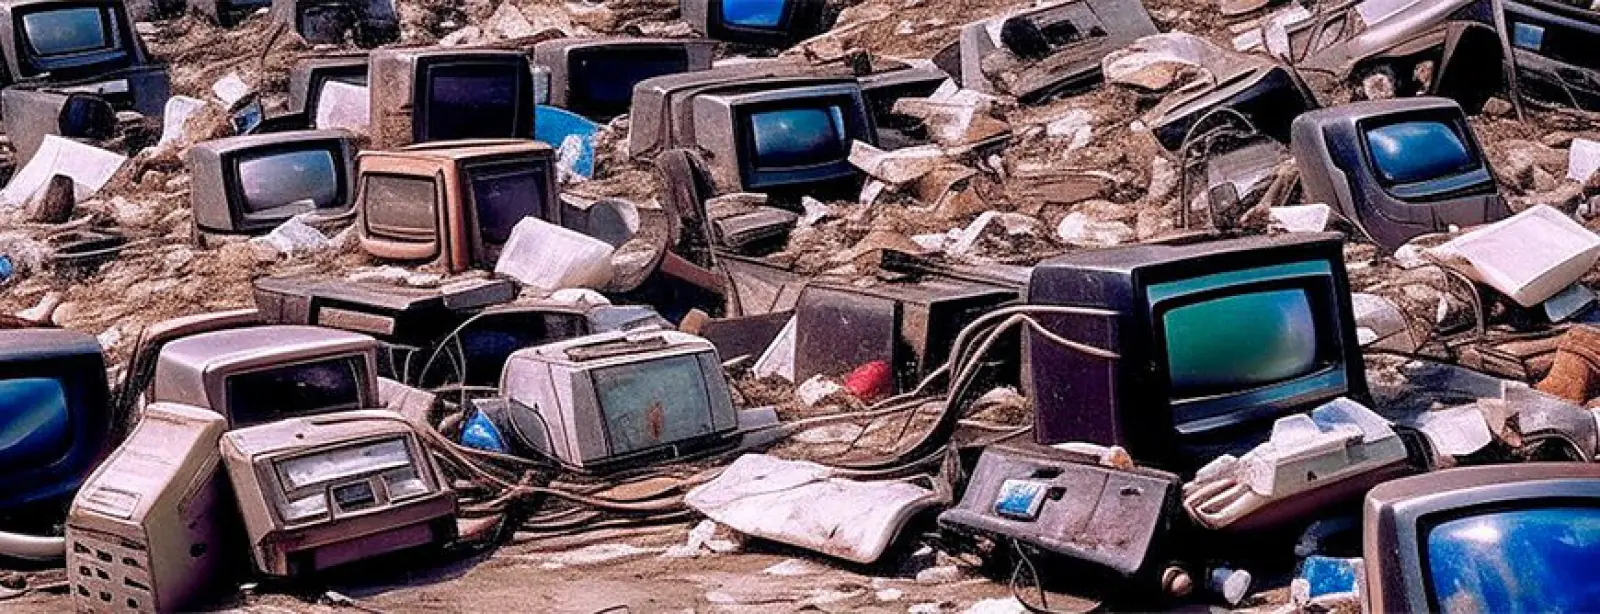 E-Waste: What is electronic waste, how is it affecting us; Know the answers to all the questions here